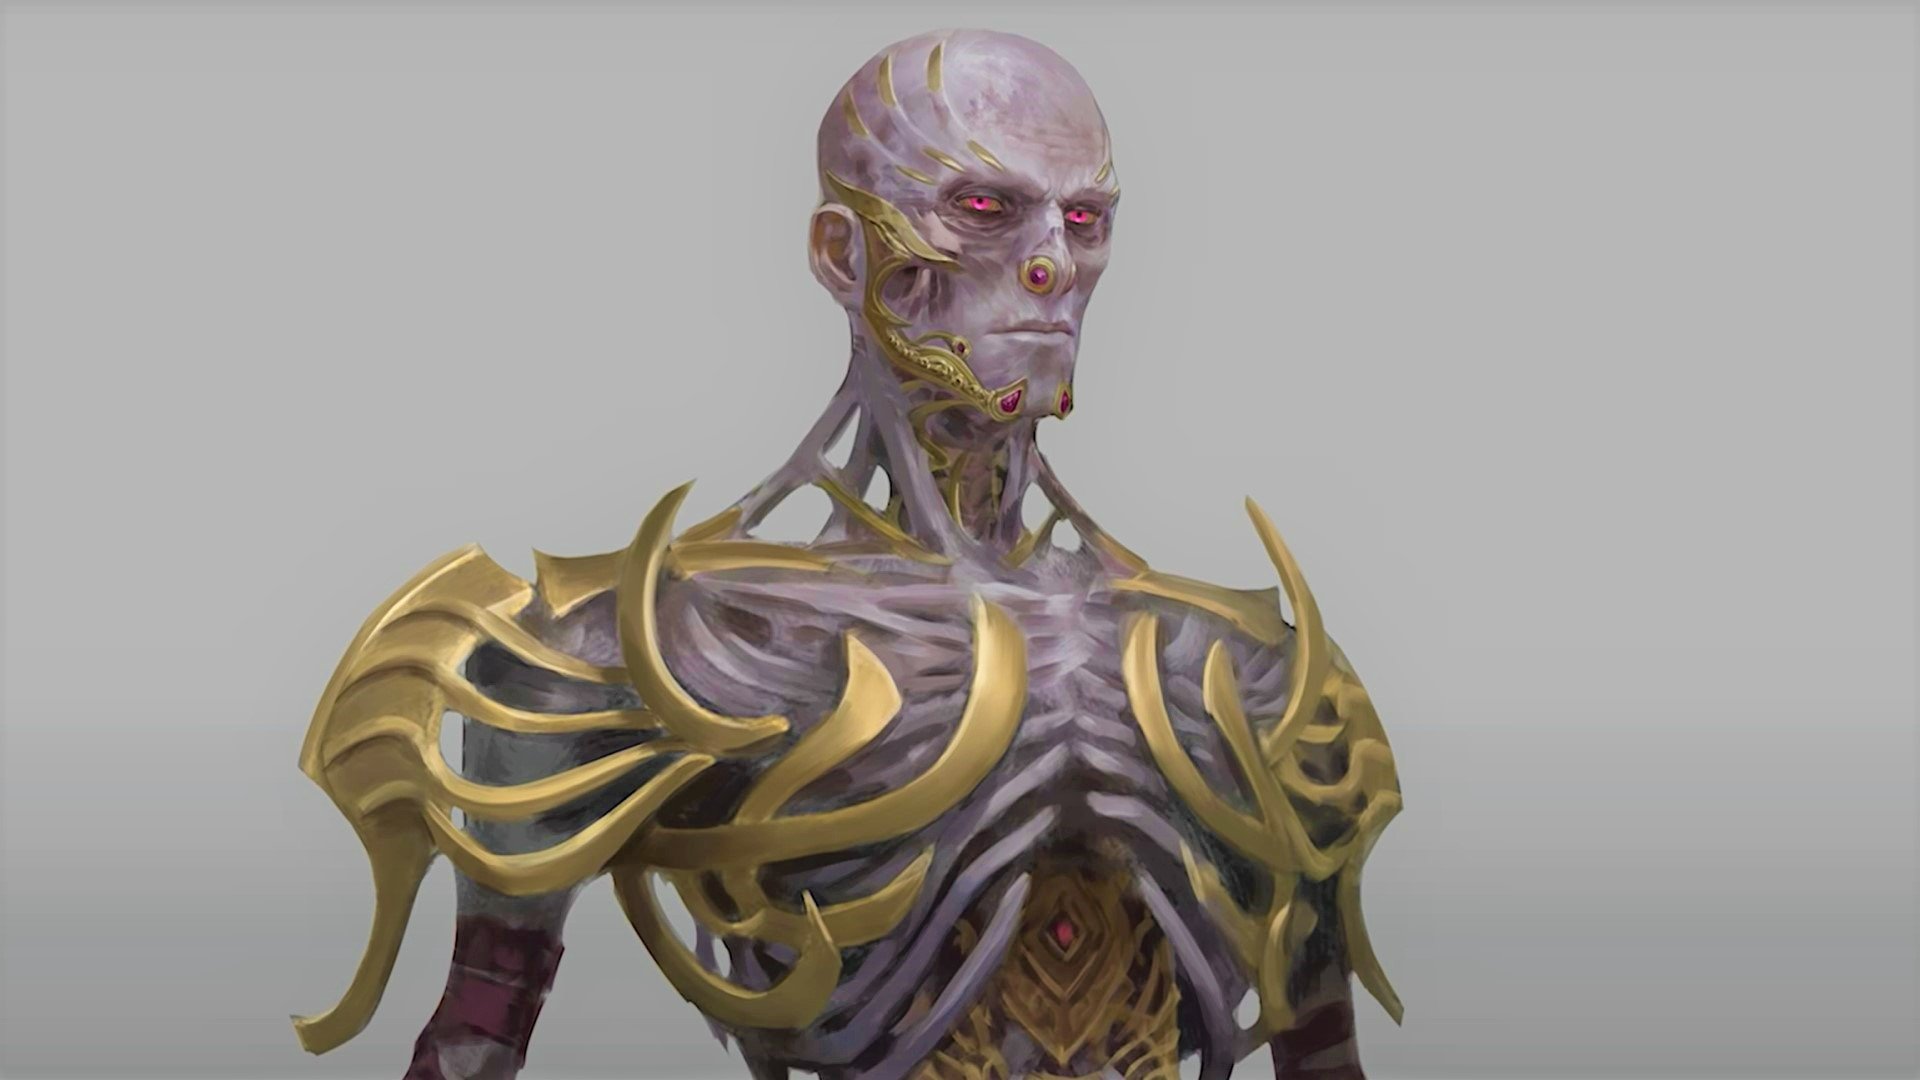 DnD Vecna - a shoulders-up illustration of Vecna, a bald, grey-skinned demi-lich wearing golden armour over his skeletal body